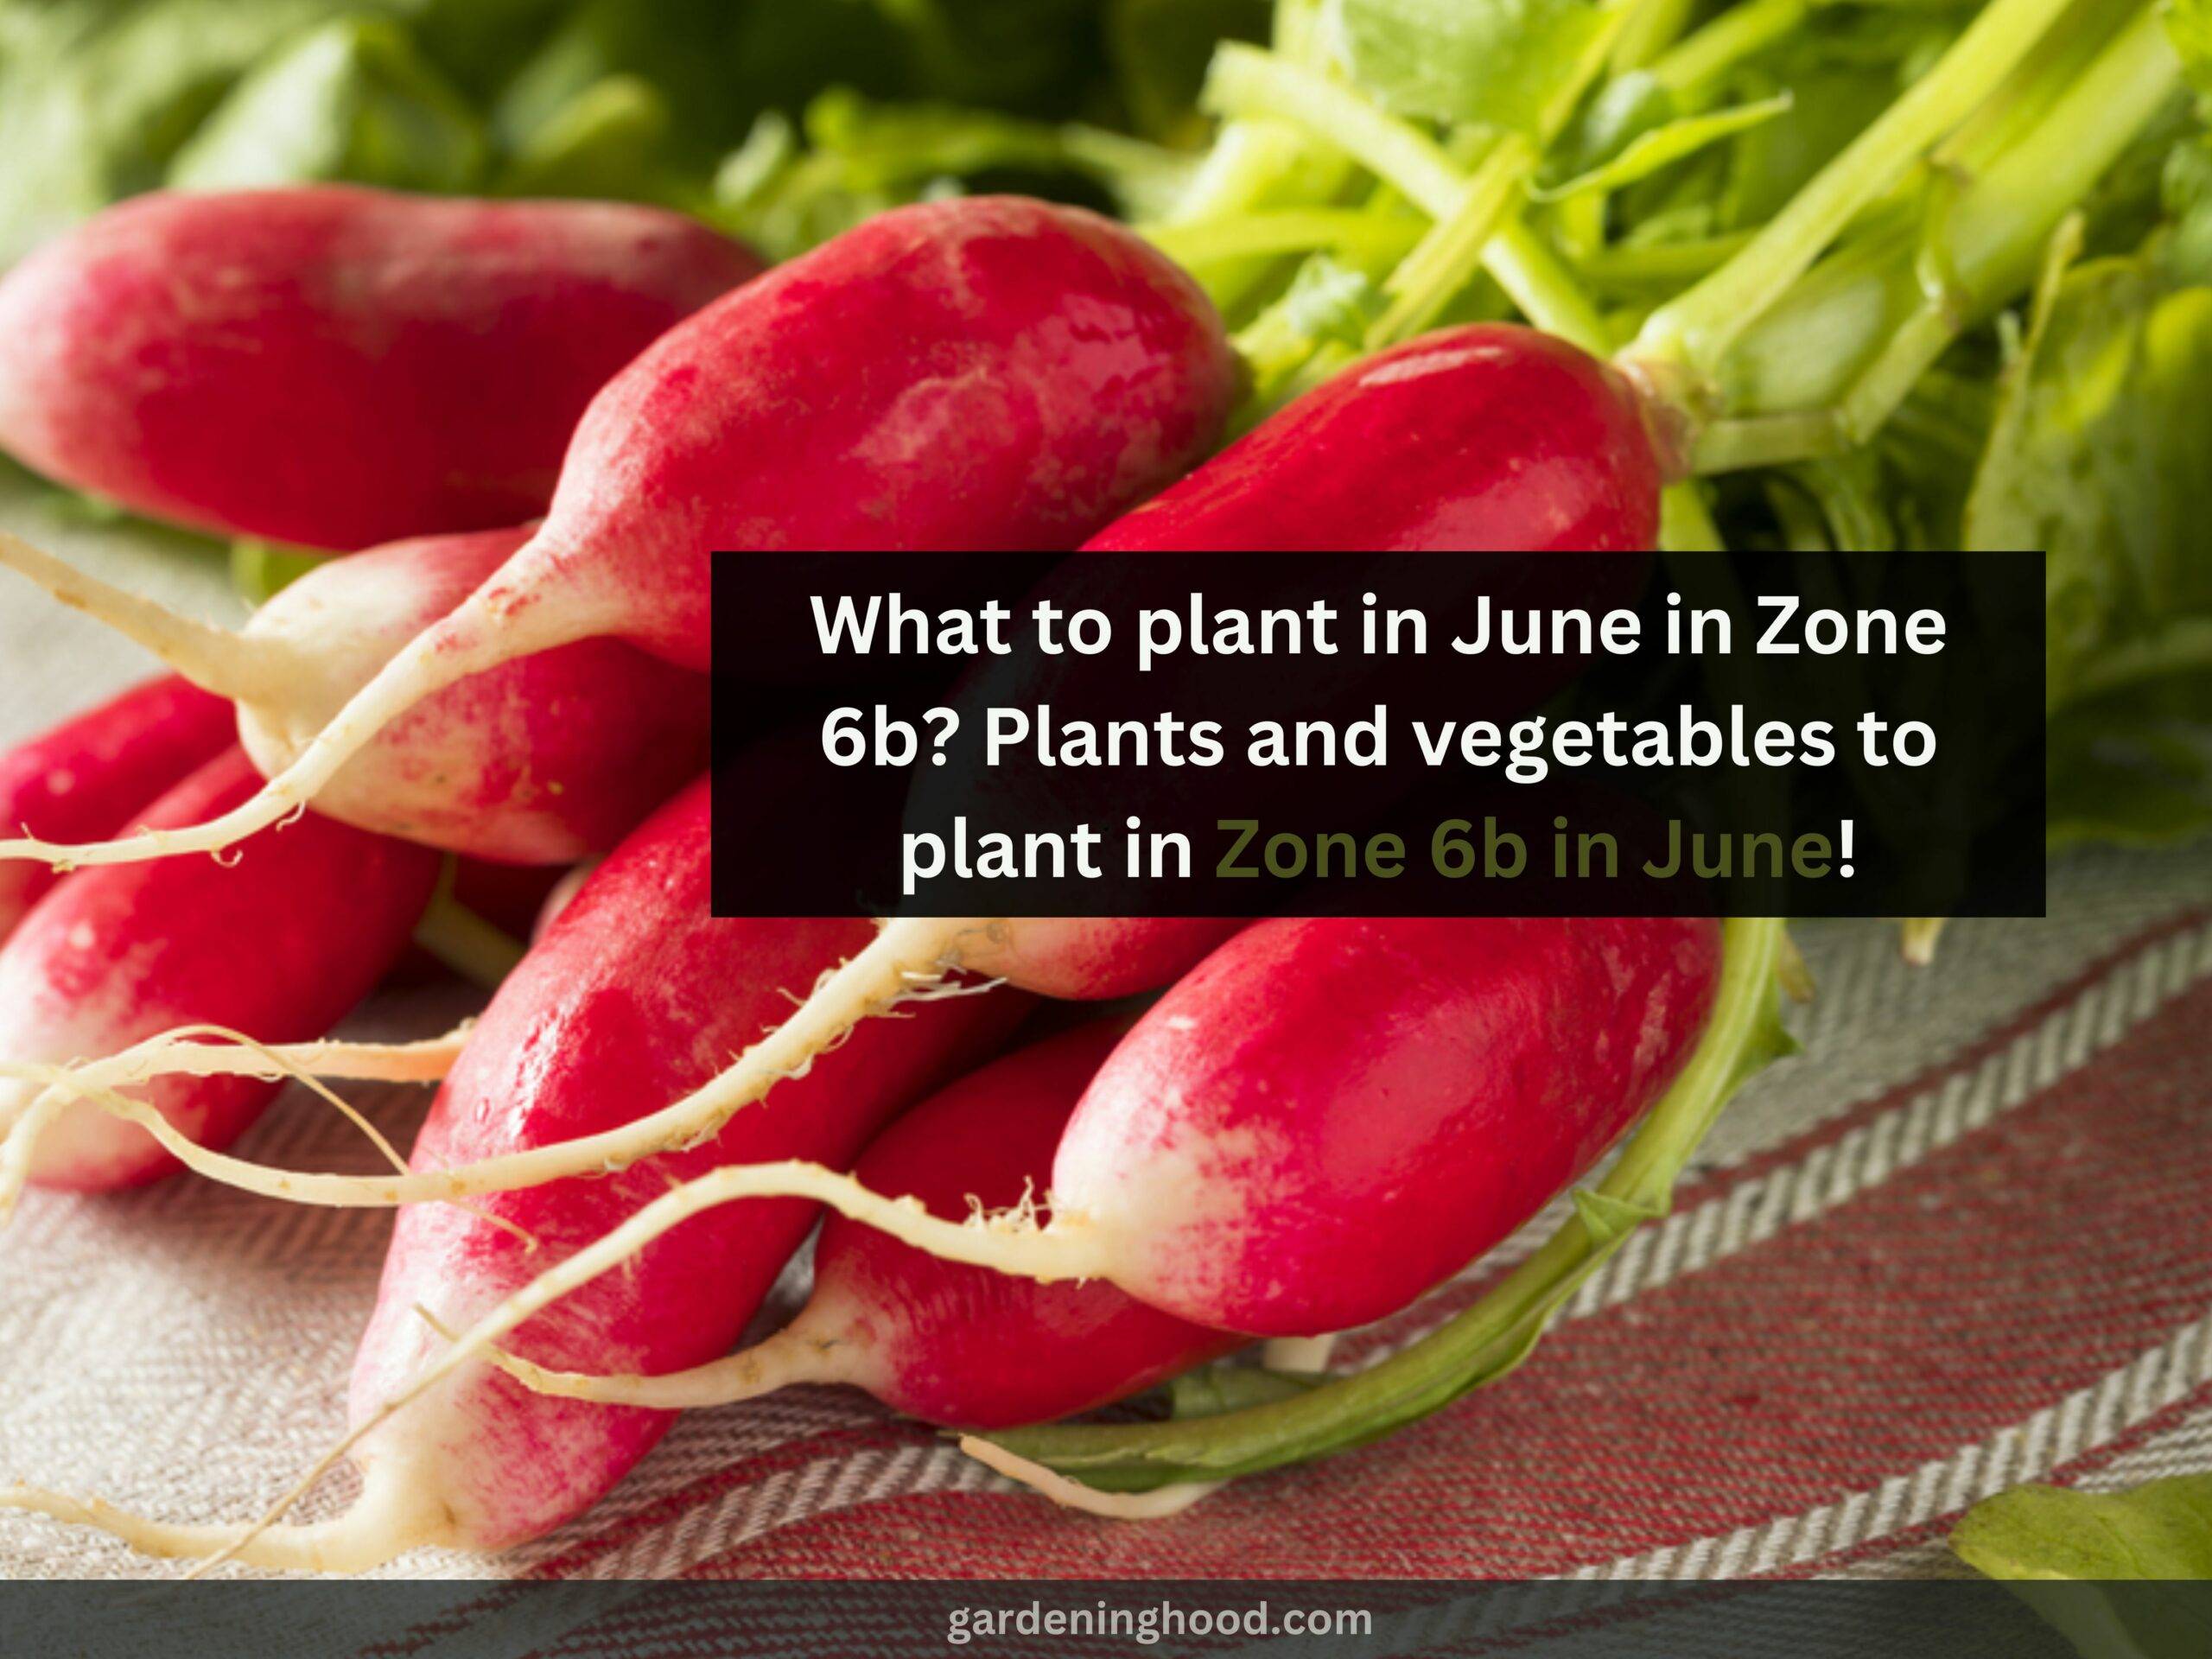 What to plant in June in Zone 6b? Plants and vegetables to plant in Zone 6b in June!